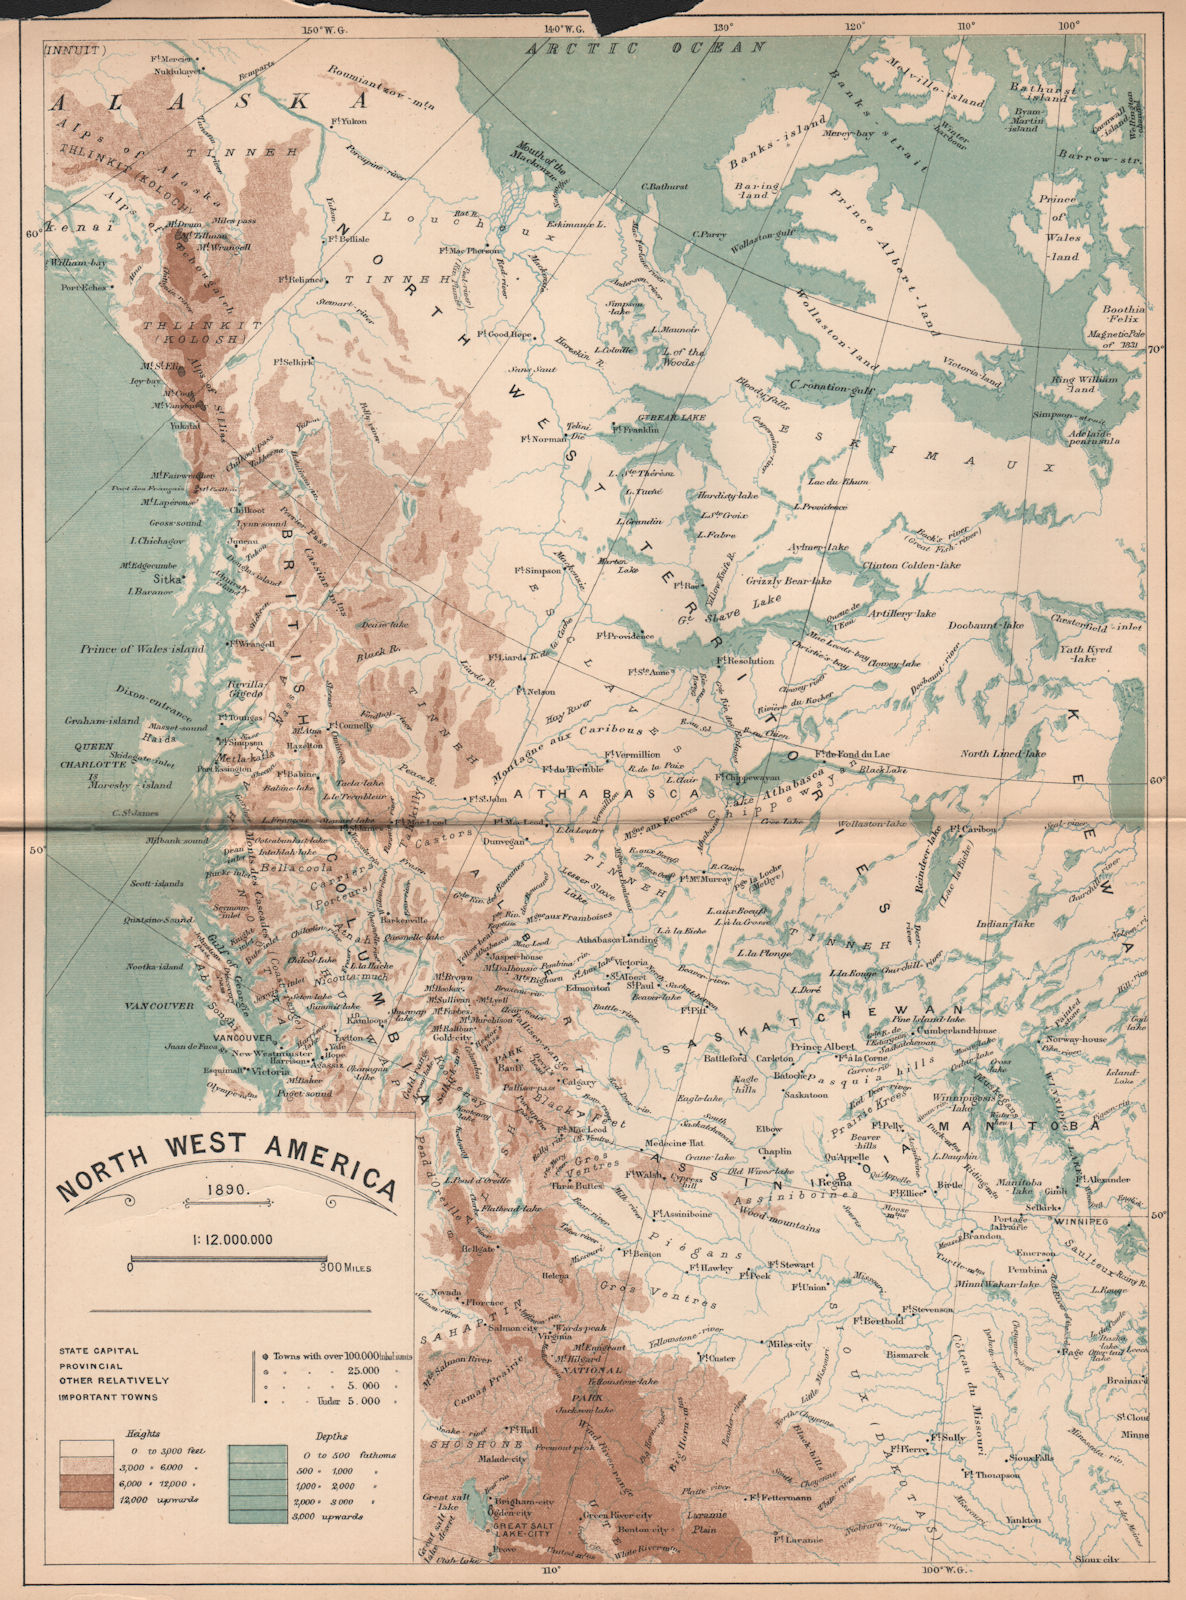 North West America 1890. Canada. The Canadian North-West Territories 1885 map